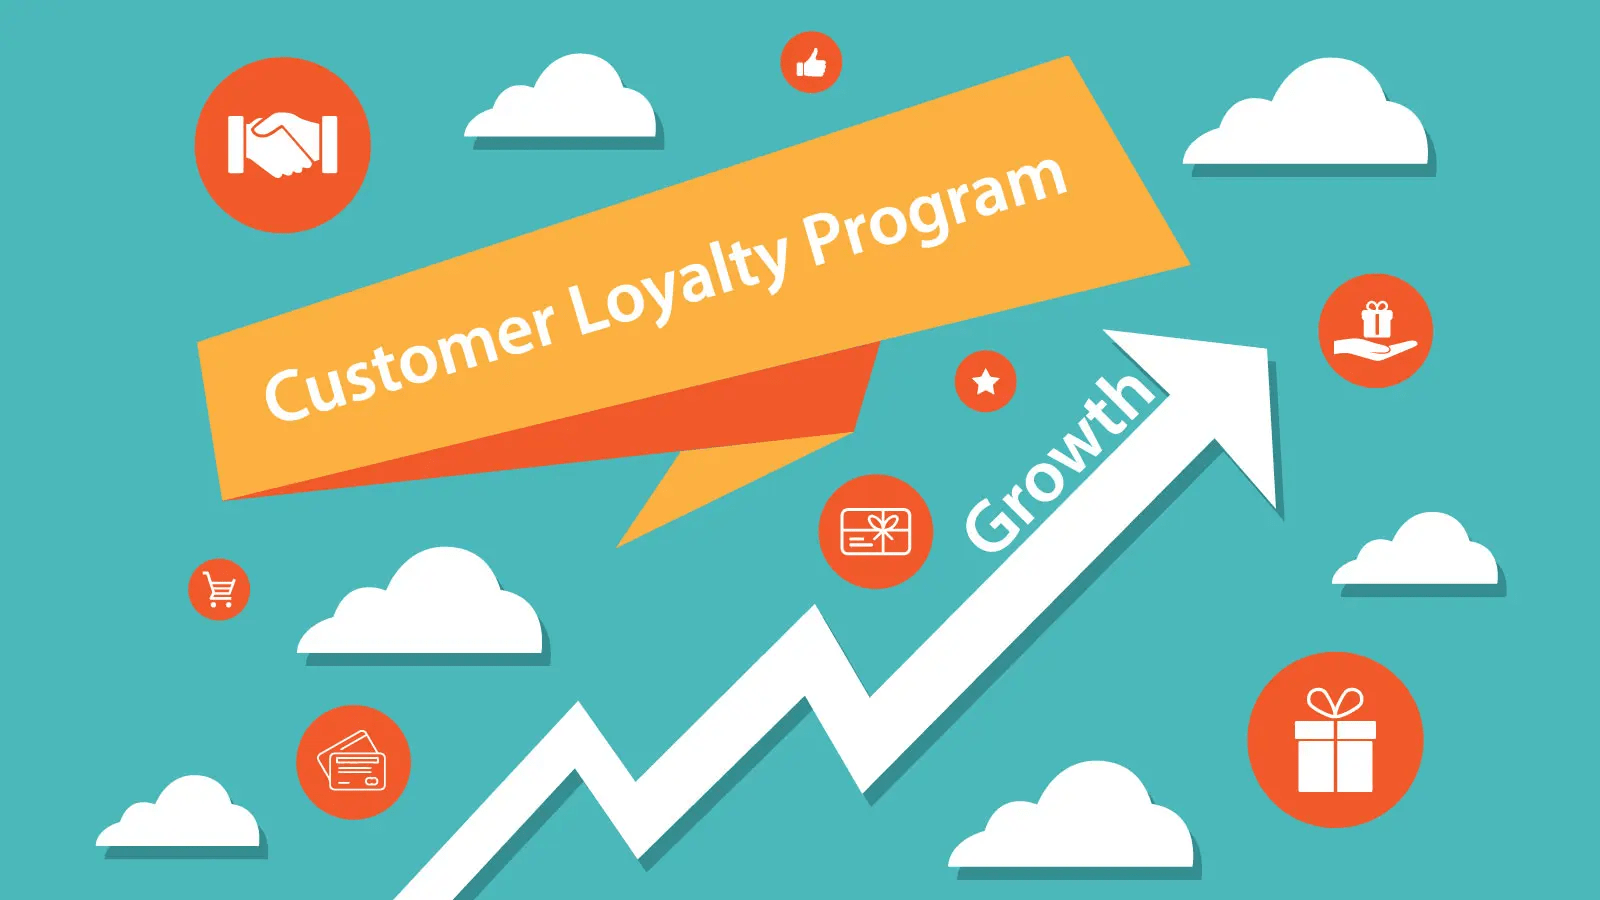 Developing a Customer Loyalty Program to Retain Existing Customers